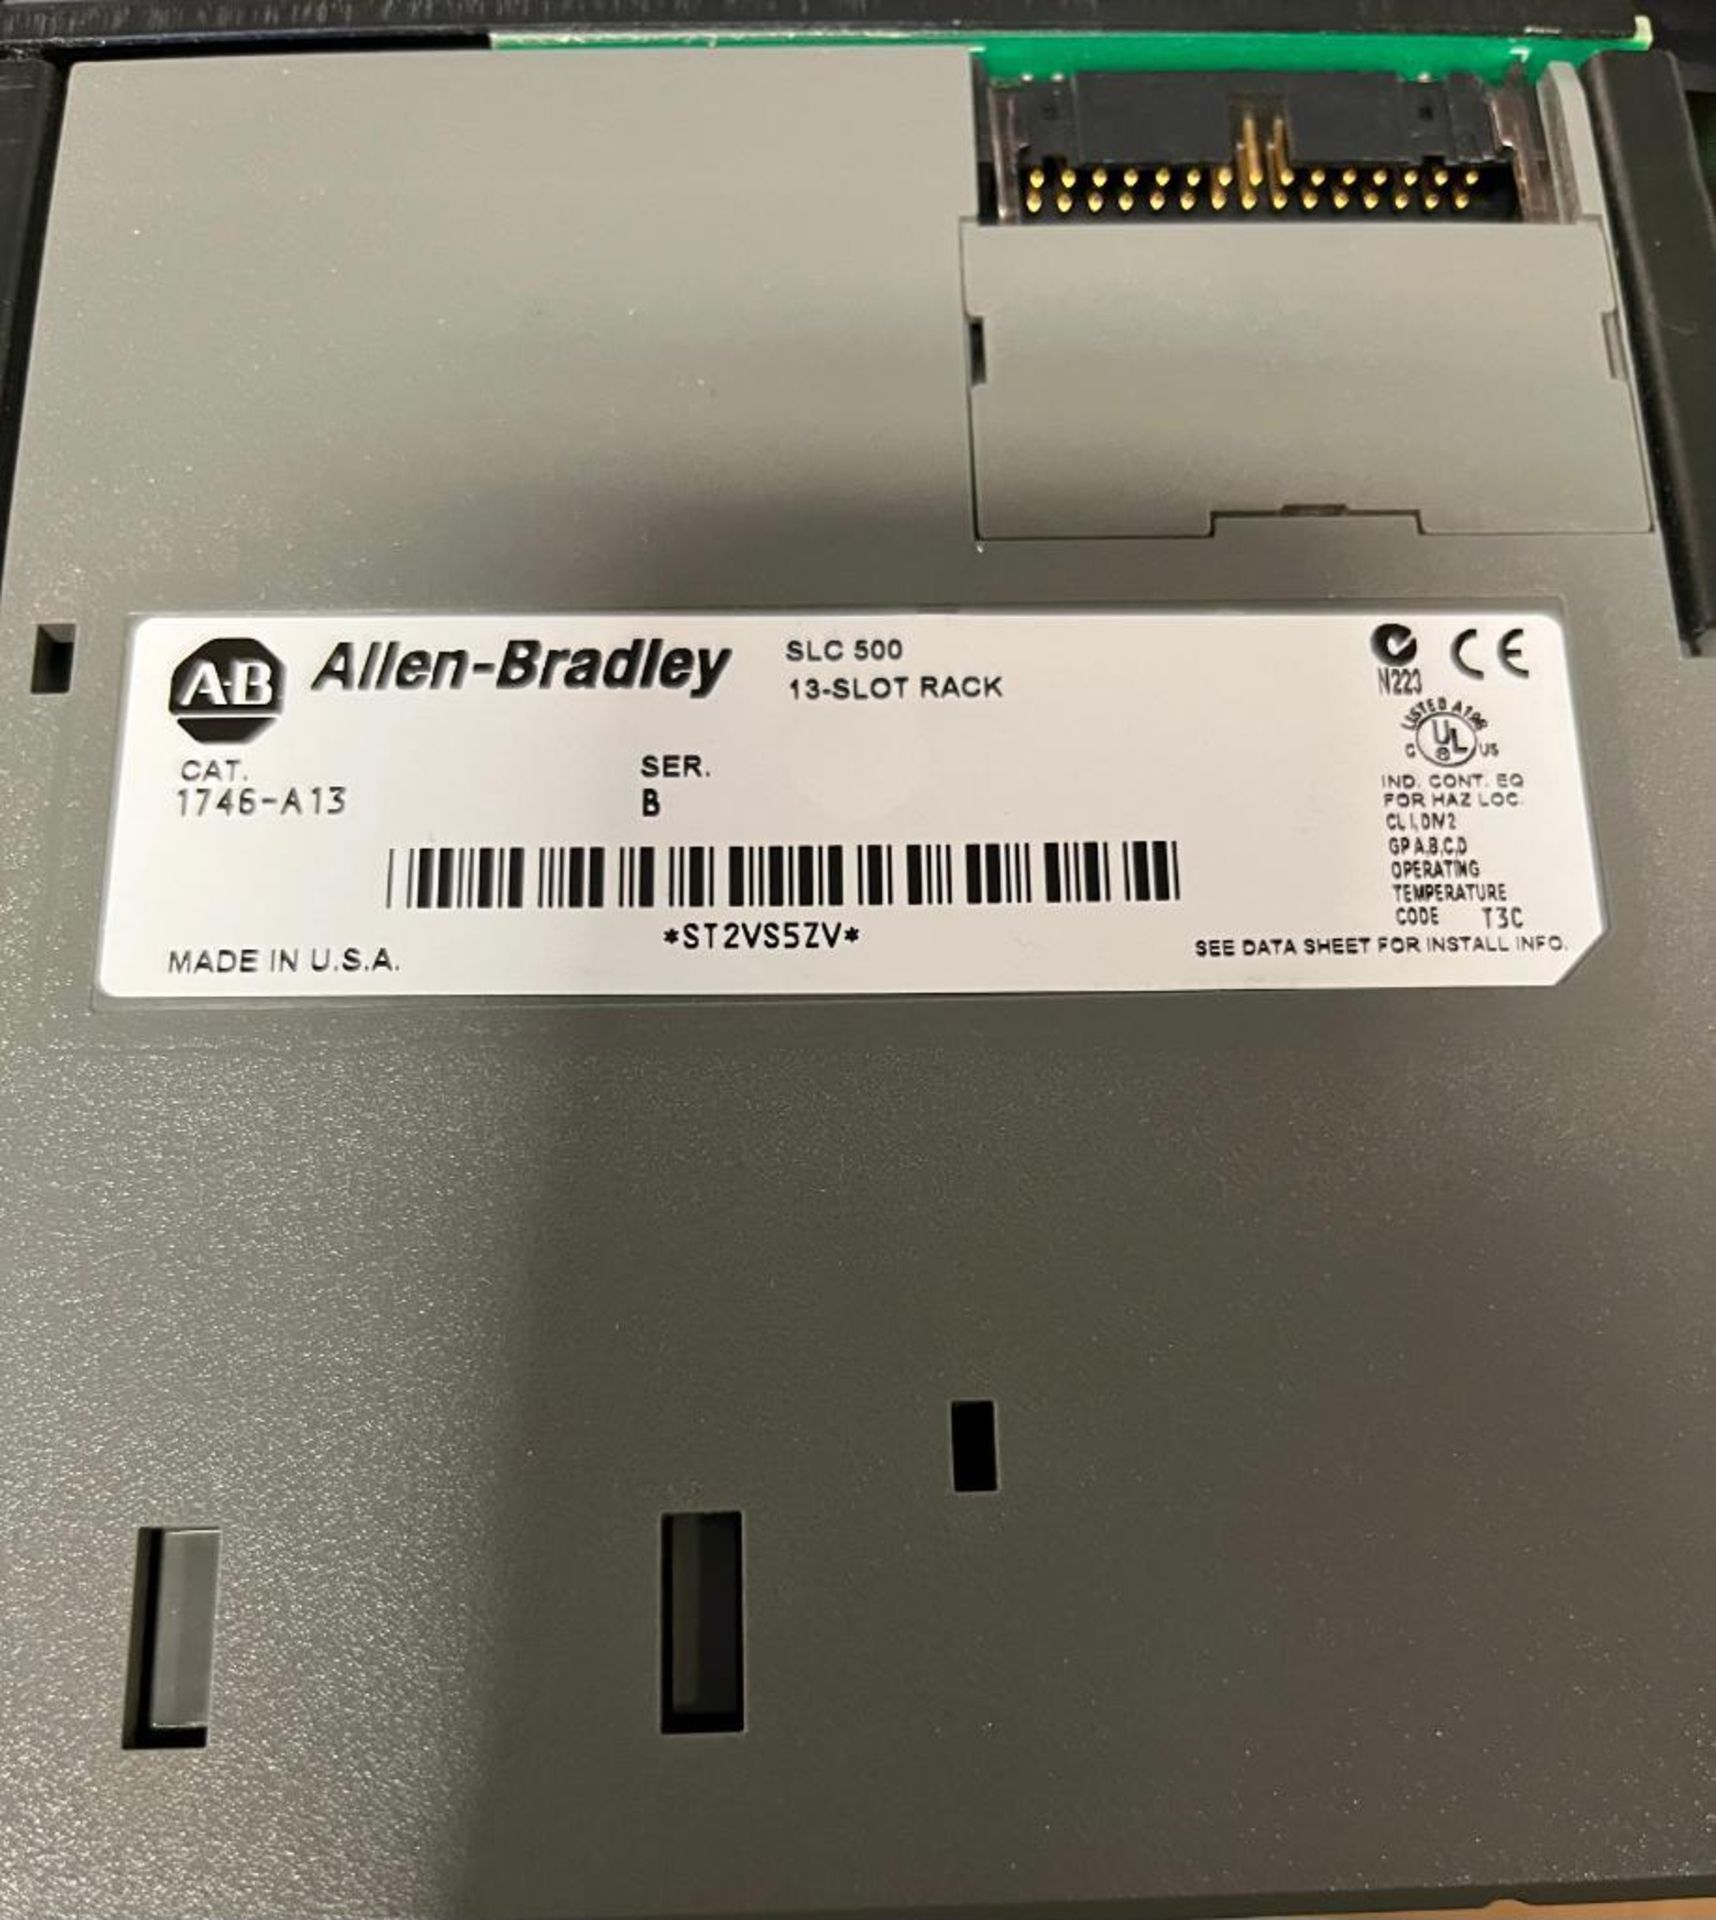 Allen-Bradley SLC 500 Power Supply, Catalog Number 1746-P4, Series A, 13-Slot Chassis - Image 3 of 3